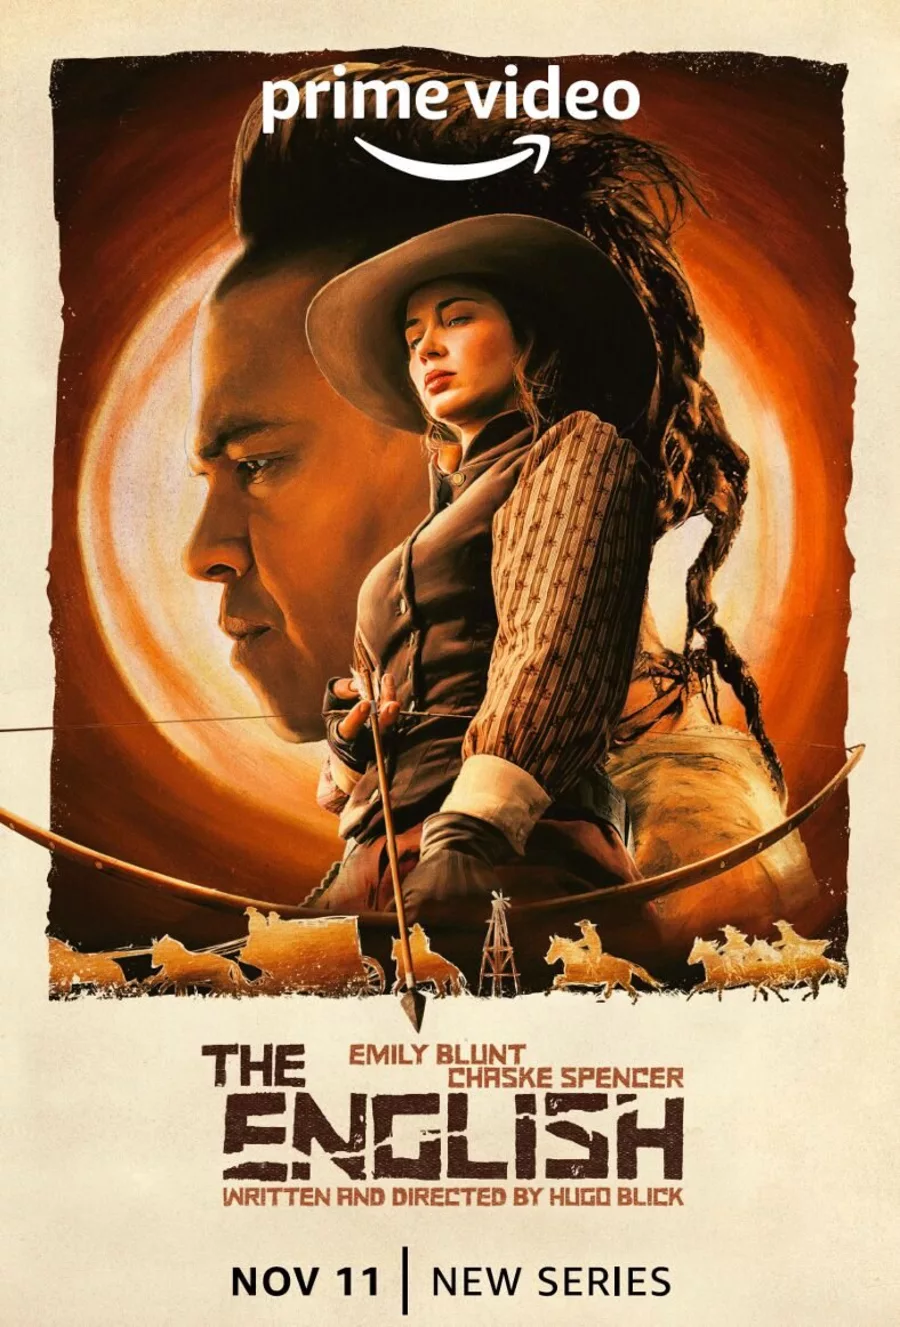 Today Amazon Prime Video premiered a 6-episode western «The English», starring Emily Blunt and Chaske Spencer.. It is a story about identity and revenge, a parabola about race, power and love, set against the mythical landscape of the American Midwest in the late 19th century. The story centers on Cornelia Locke, an Englishwoman who arrives in the West to find the man she believes responsible for the death of her son and seek revenge. She meets Eli Whipp, a representative of the Pawnee people, a former cavalry scout. They join forces as they share a history that they must overcome in order to survive.